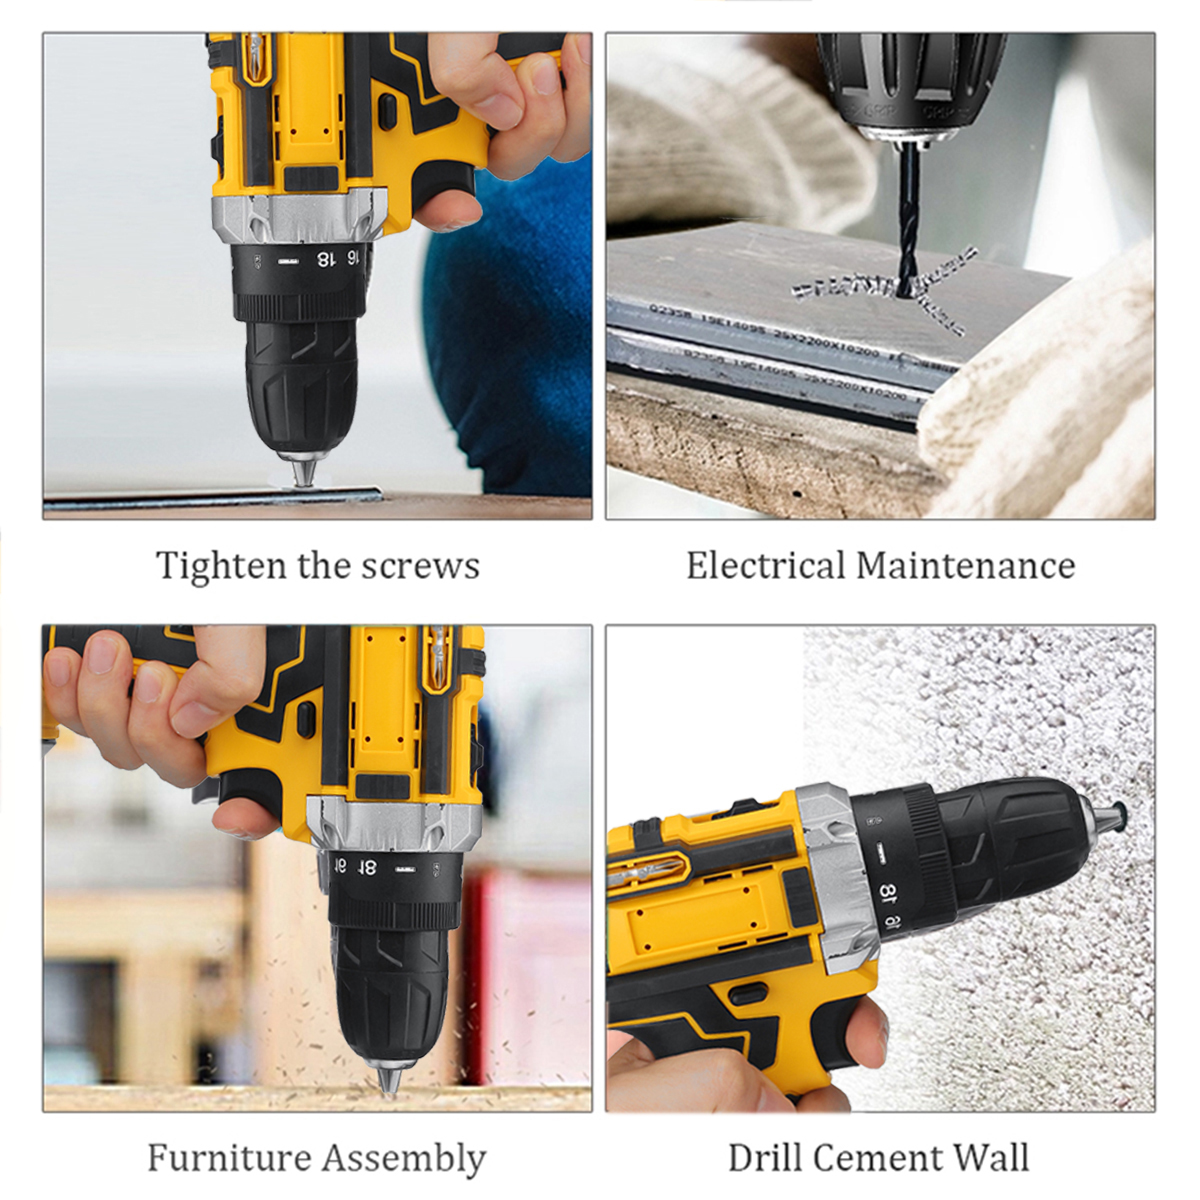 21V-Wireless-Rechargeable-Impact-Hammer-Drill-Electric-Screwdriver-W-Battery--Storage-Case-Screwing--1858203-3